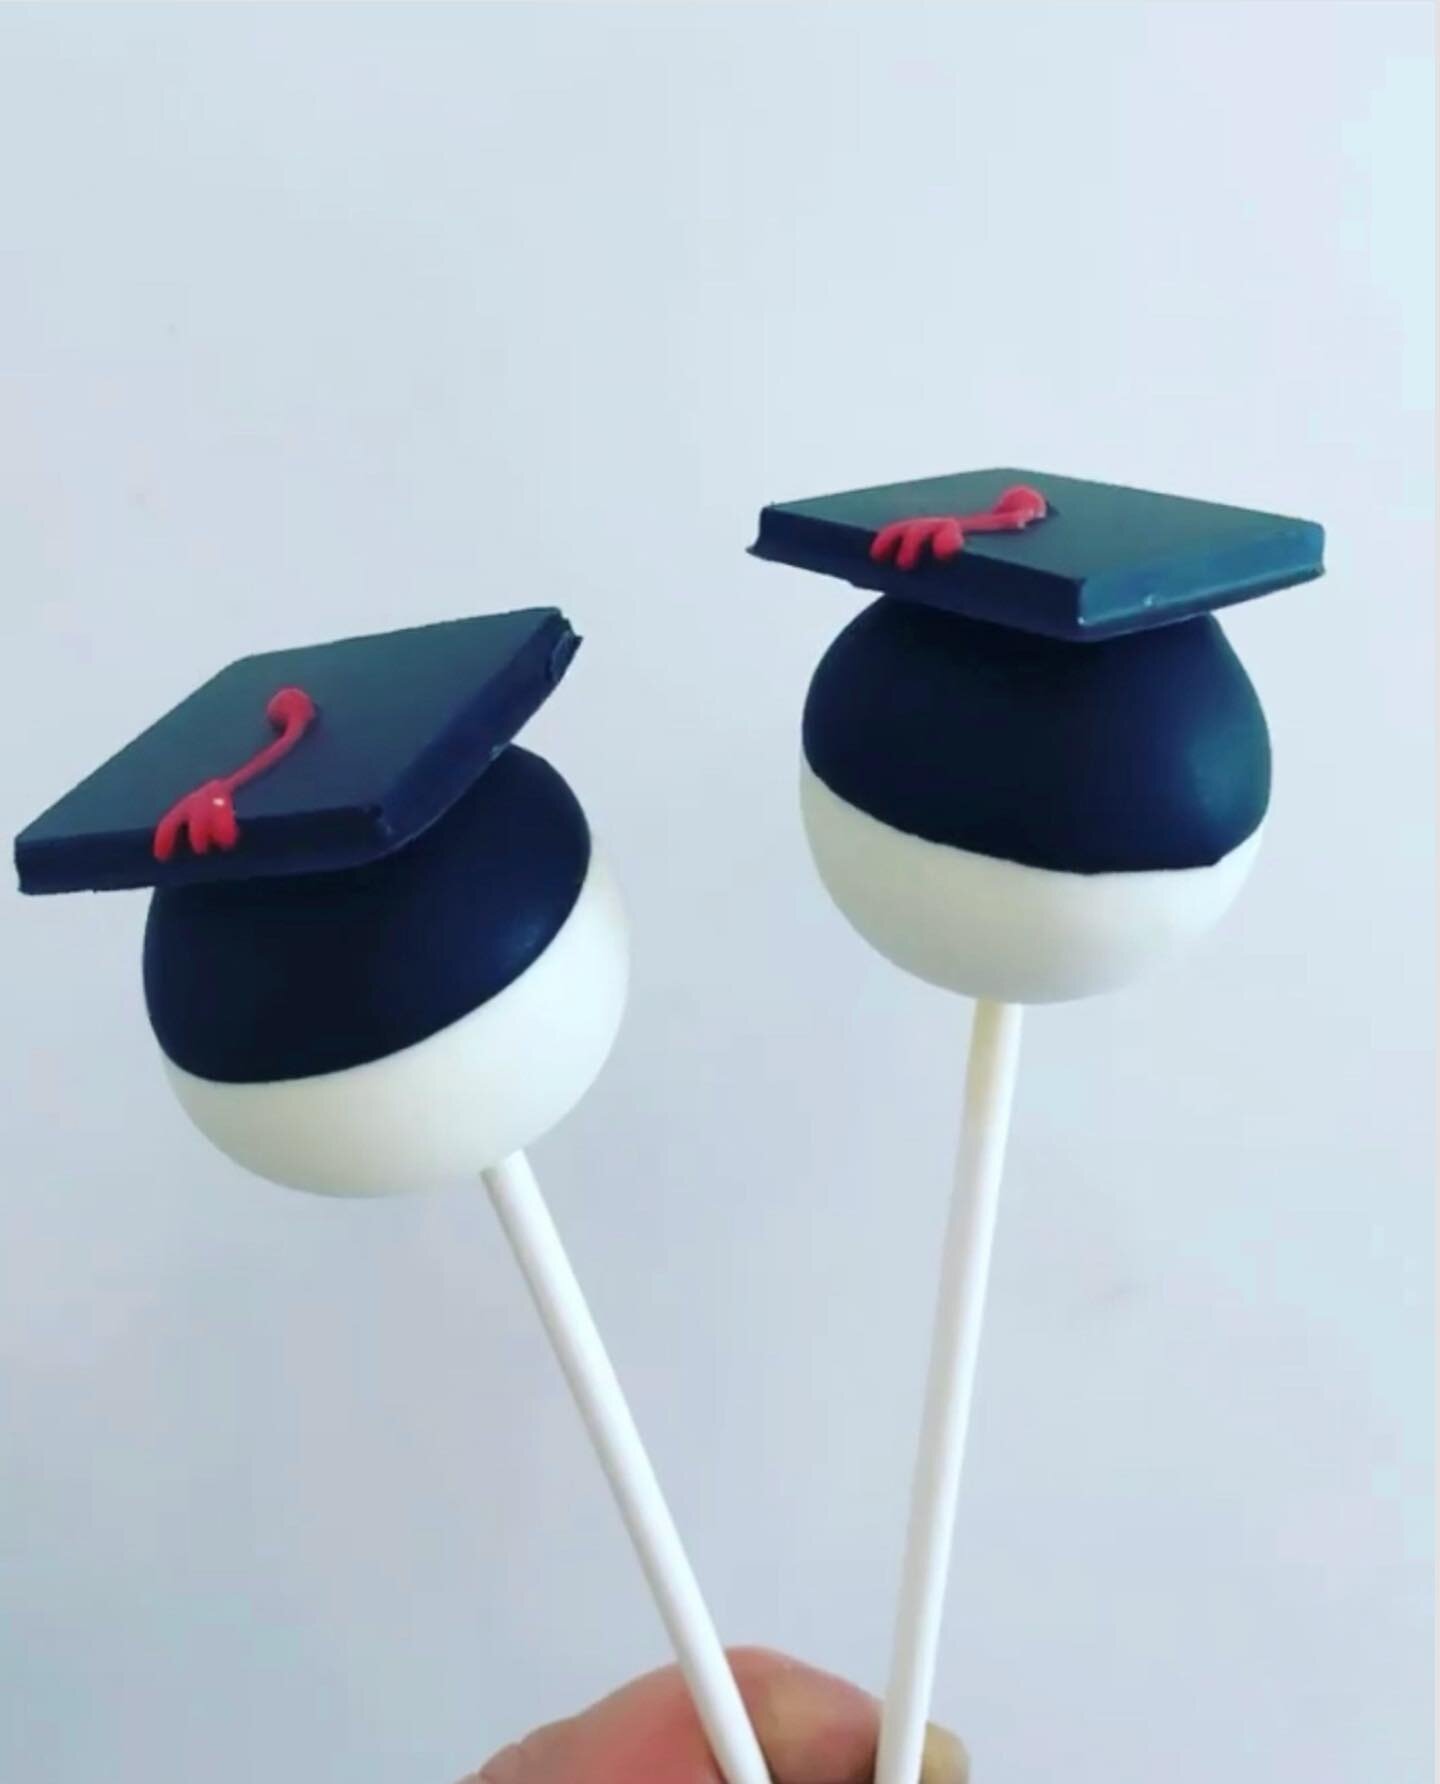 It&rsquo;s almost grad season&ndash;reminder to order your custom desserts in advance!🎓 

#sweetandflour #secaucus #nj #njbakery #jersey #customcakes #cakelife #cupcakes #smallbusiness

#bakery #cake #baking #dessert #pastry #foodporn #instafood #ch